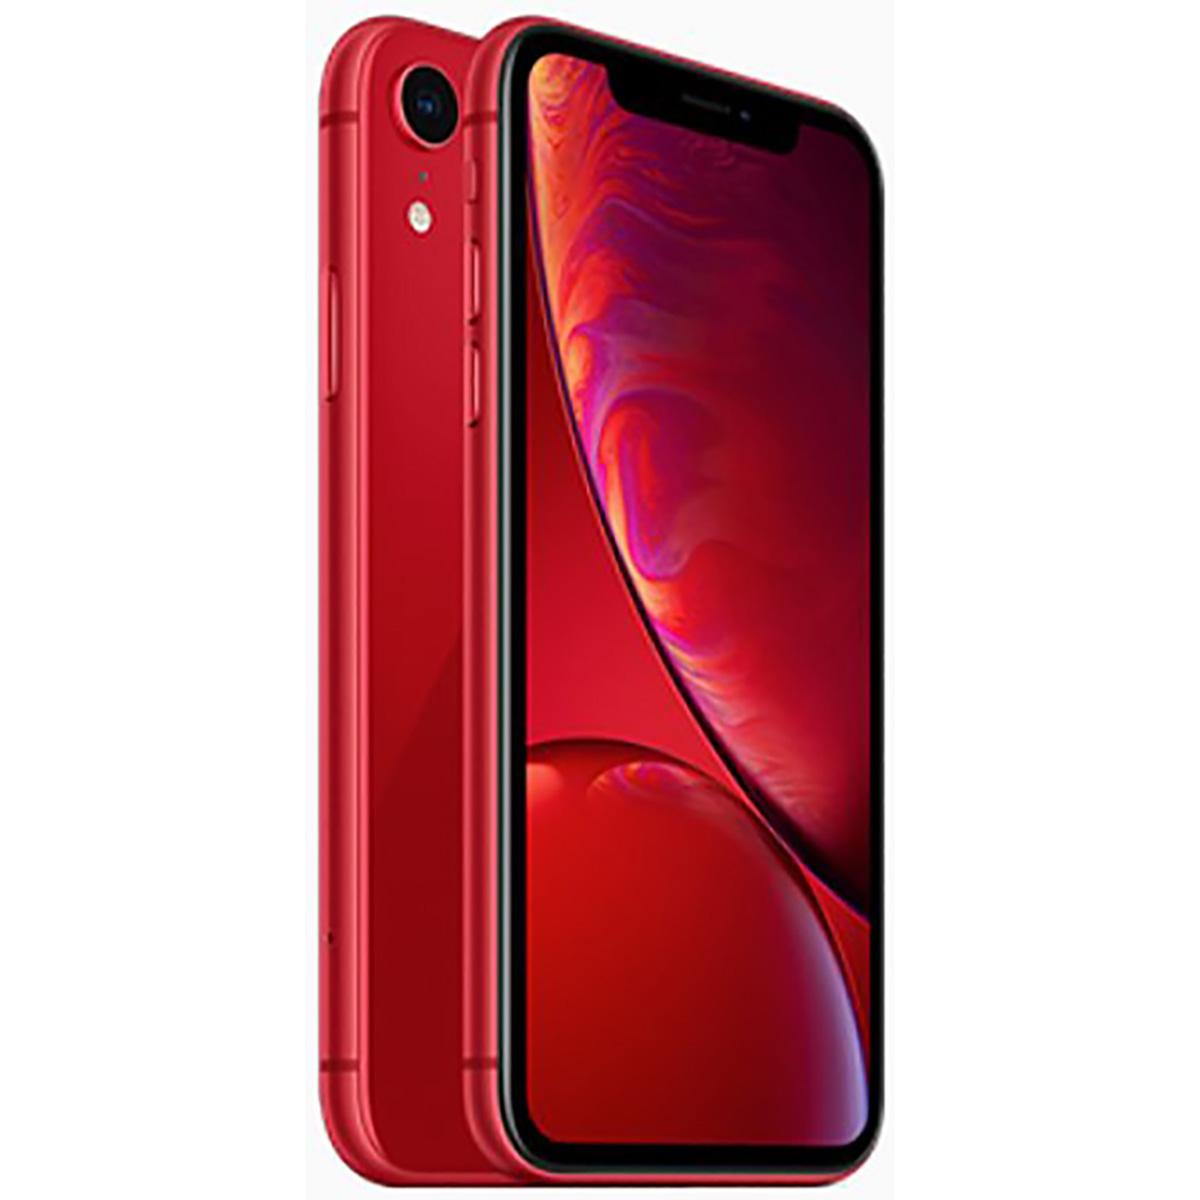 Apple iPhone XR 64GB Unlocked Smartphone for $224.95 Shipped